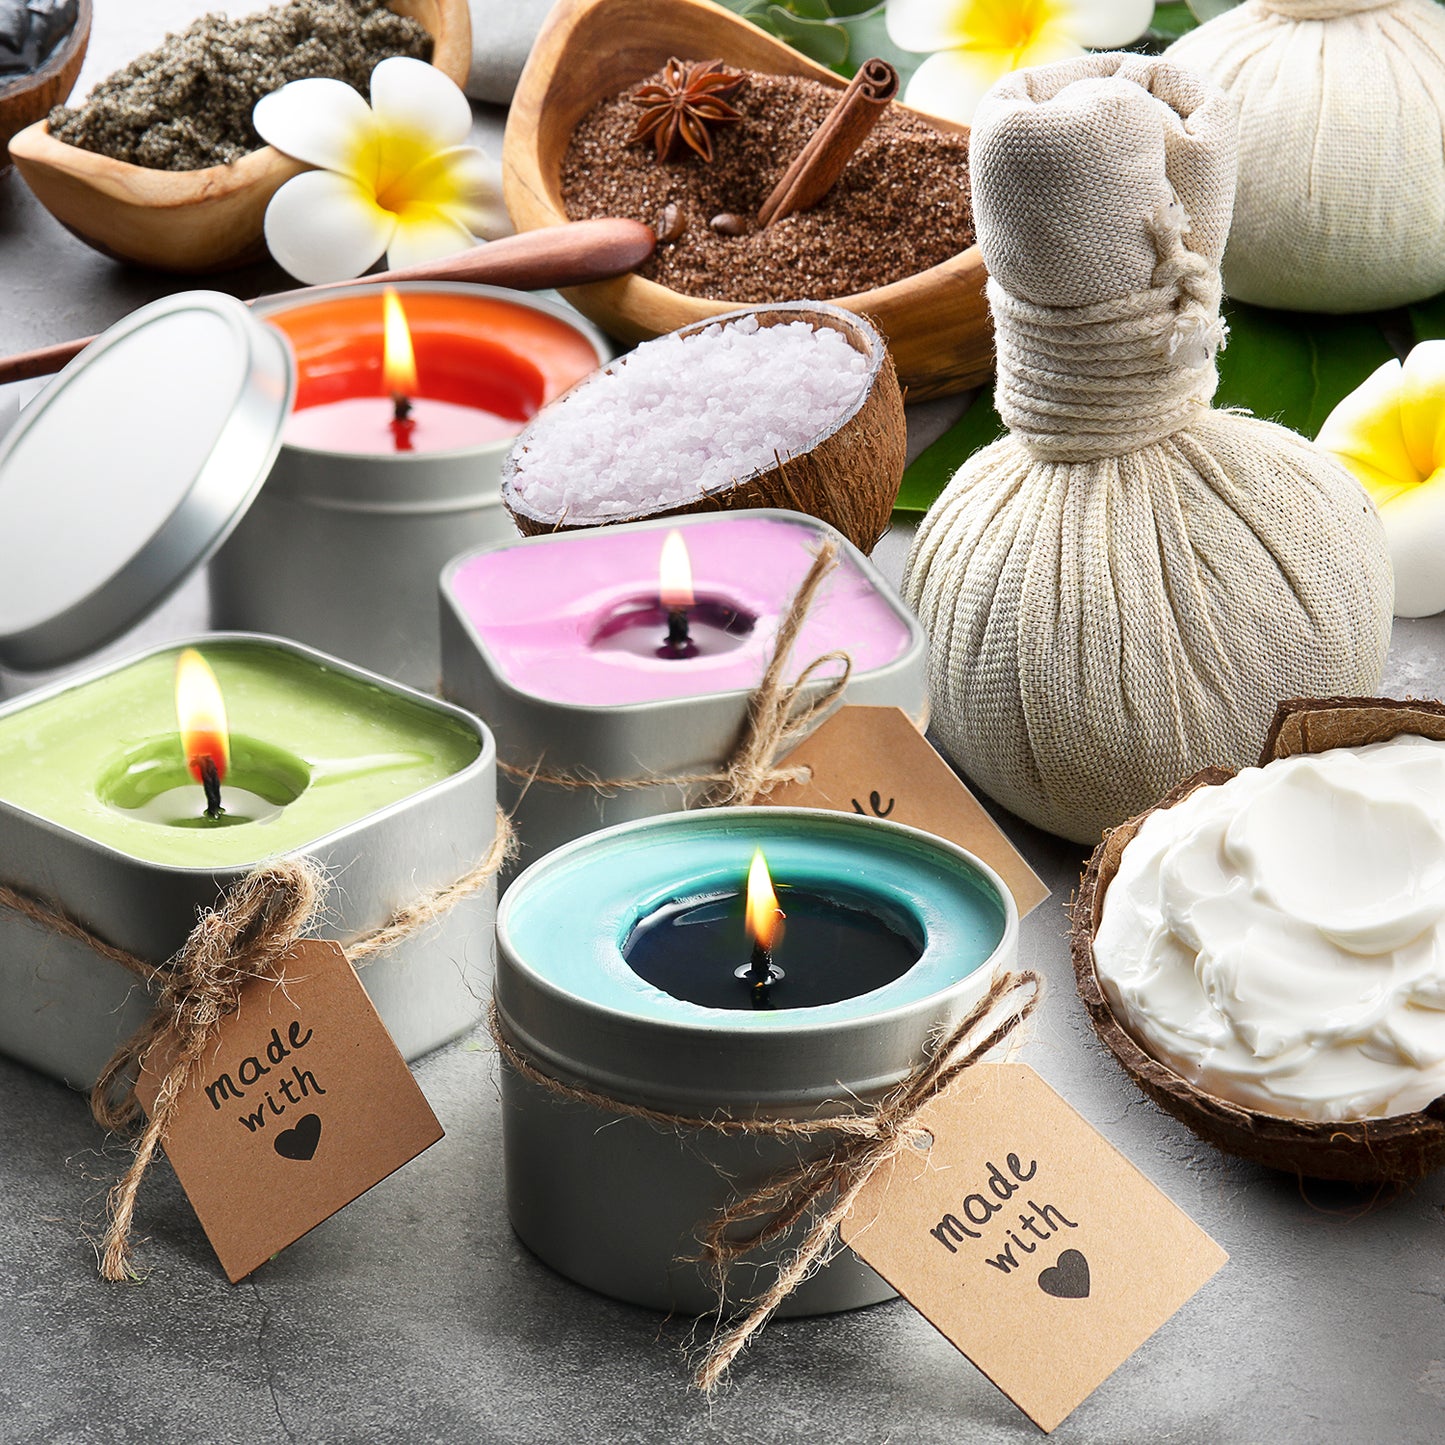 Hearth & Harbor Soy Candle Making Kit - Natural Soy Wax, Tins, Melting Pot, Cotton Wicks, Metal Centering Tool, and More - Multi